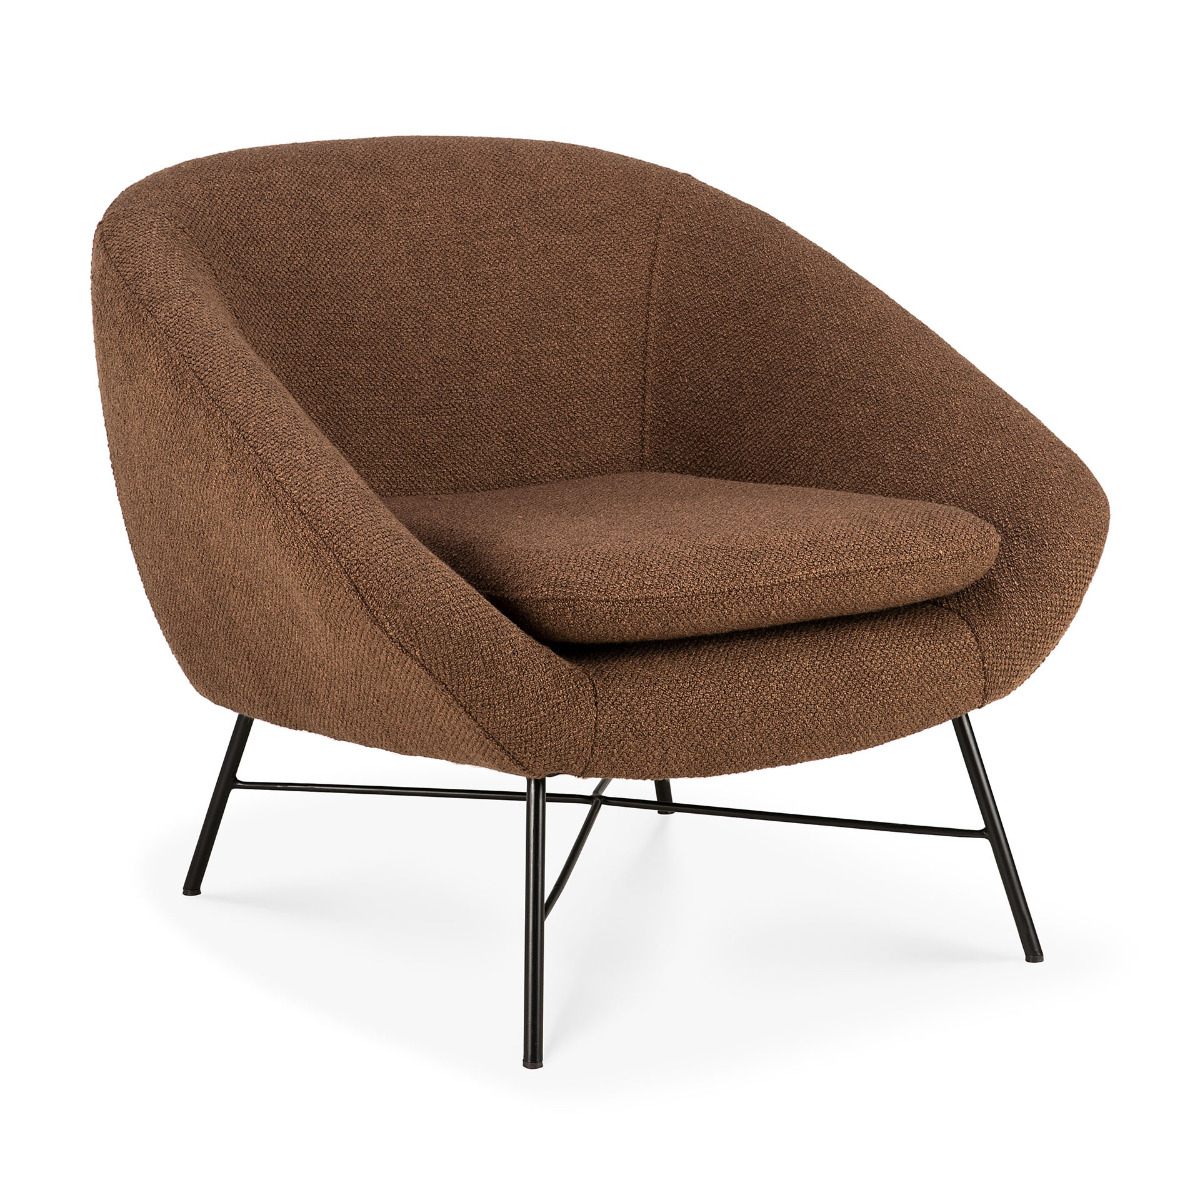 Barrow lounge chair in copper